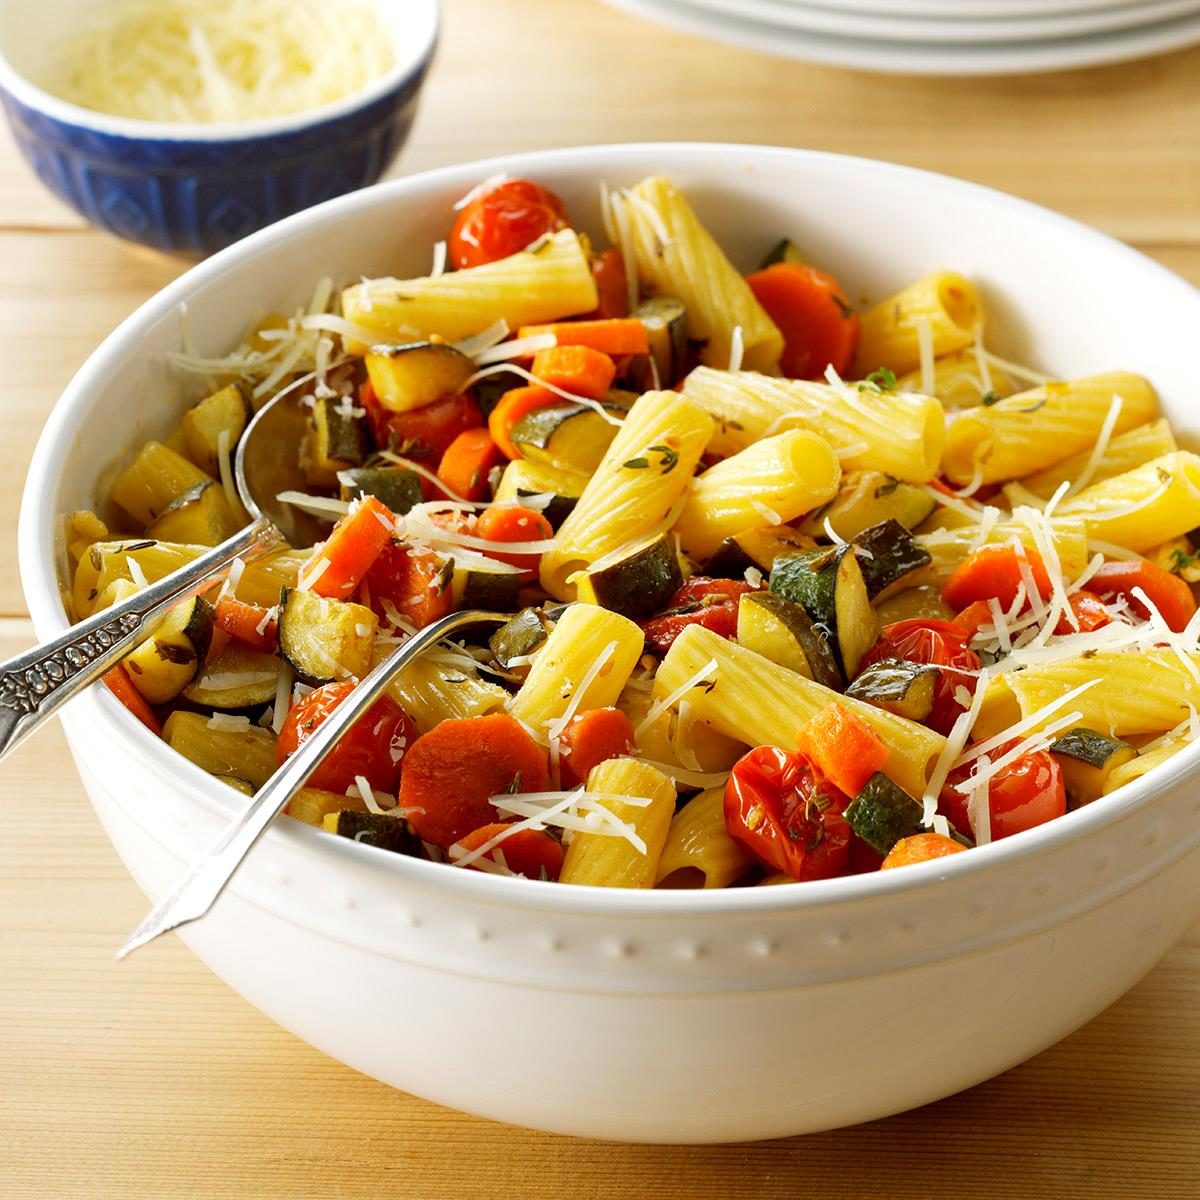 Balsamic Roasted Vegetable Primavera Recipe: How to Make It